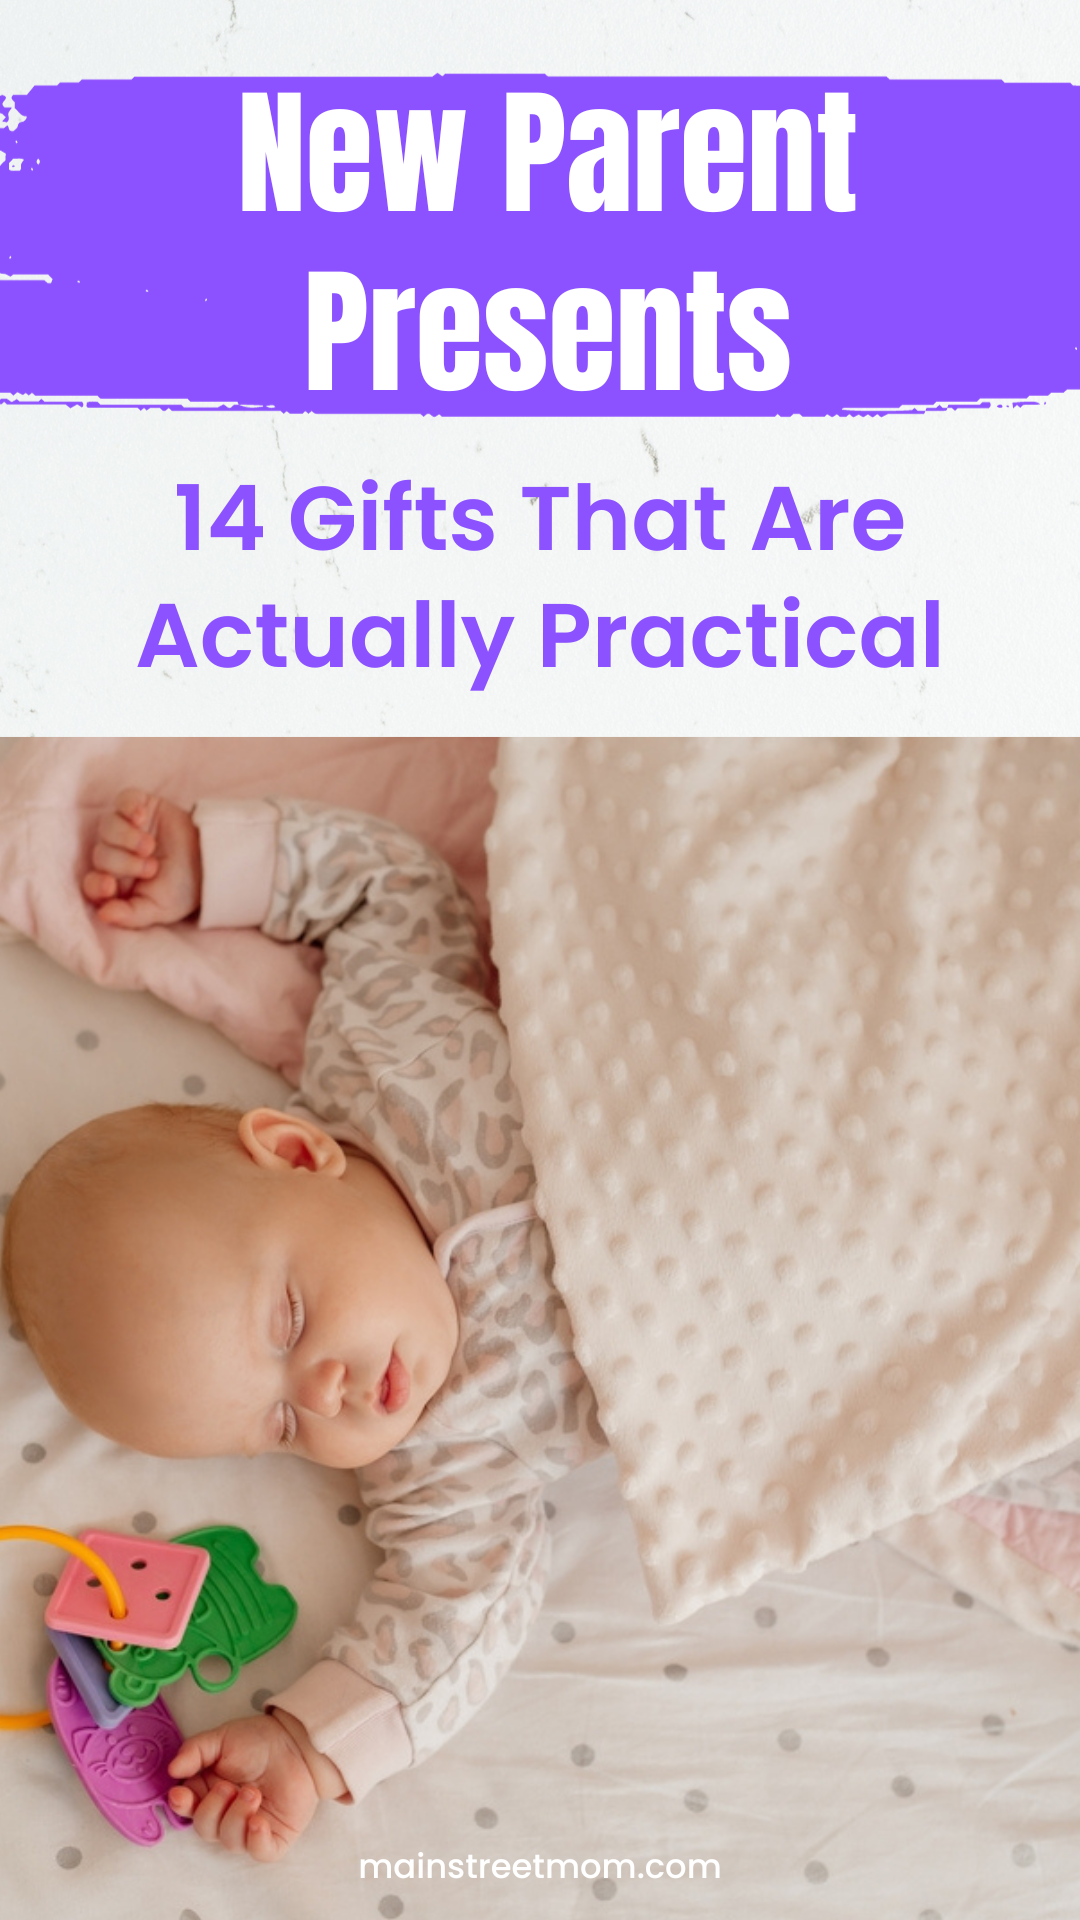 New Parent Presents: 14 Gifts That Are Actually Practical